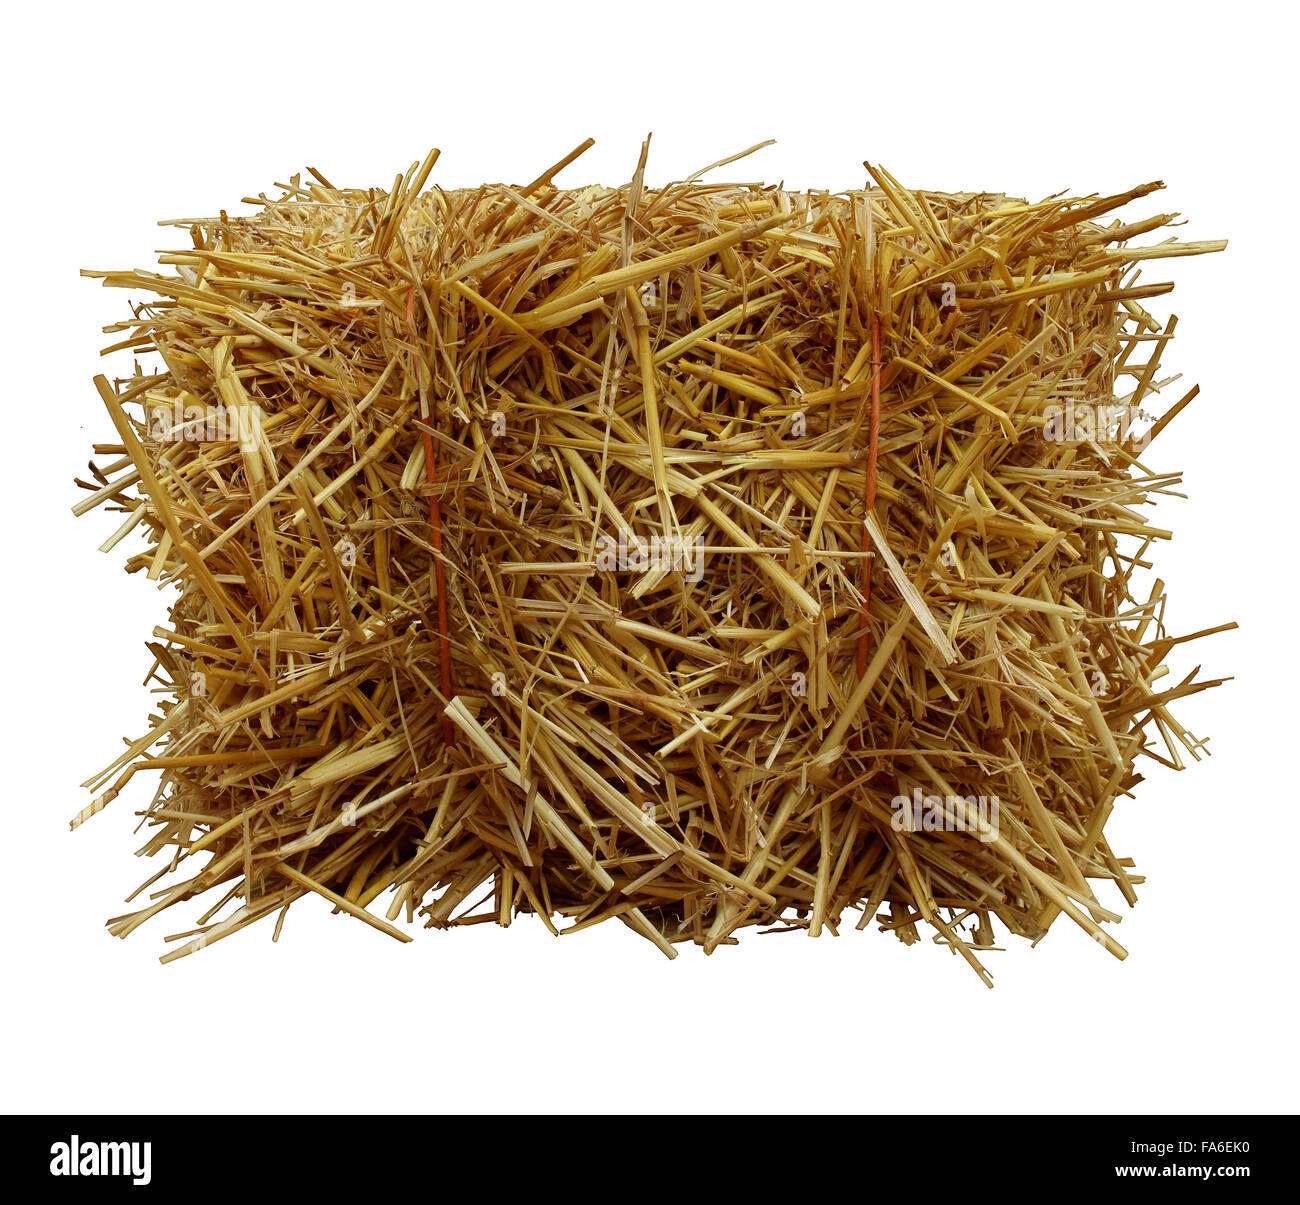 Bale of hay front view isolated on a white background as an agriculture farm and farming symbol of harvest time with dried grass straw as a bundled tied haystack. Stock Photo